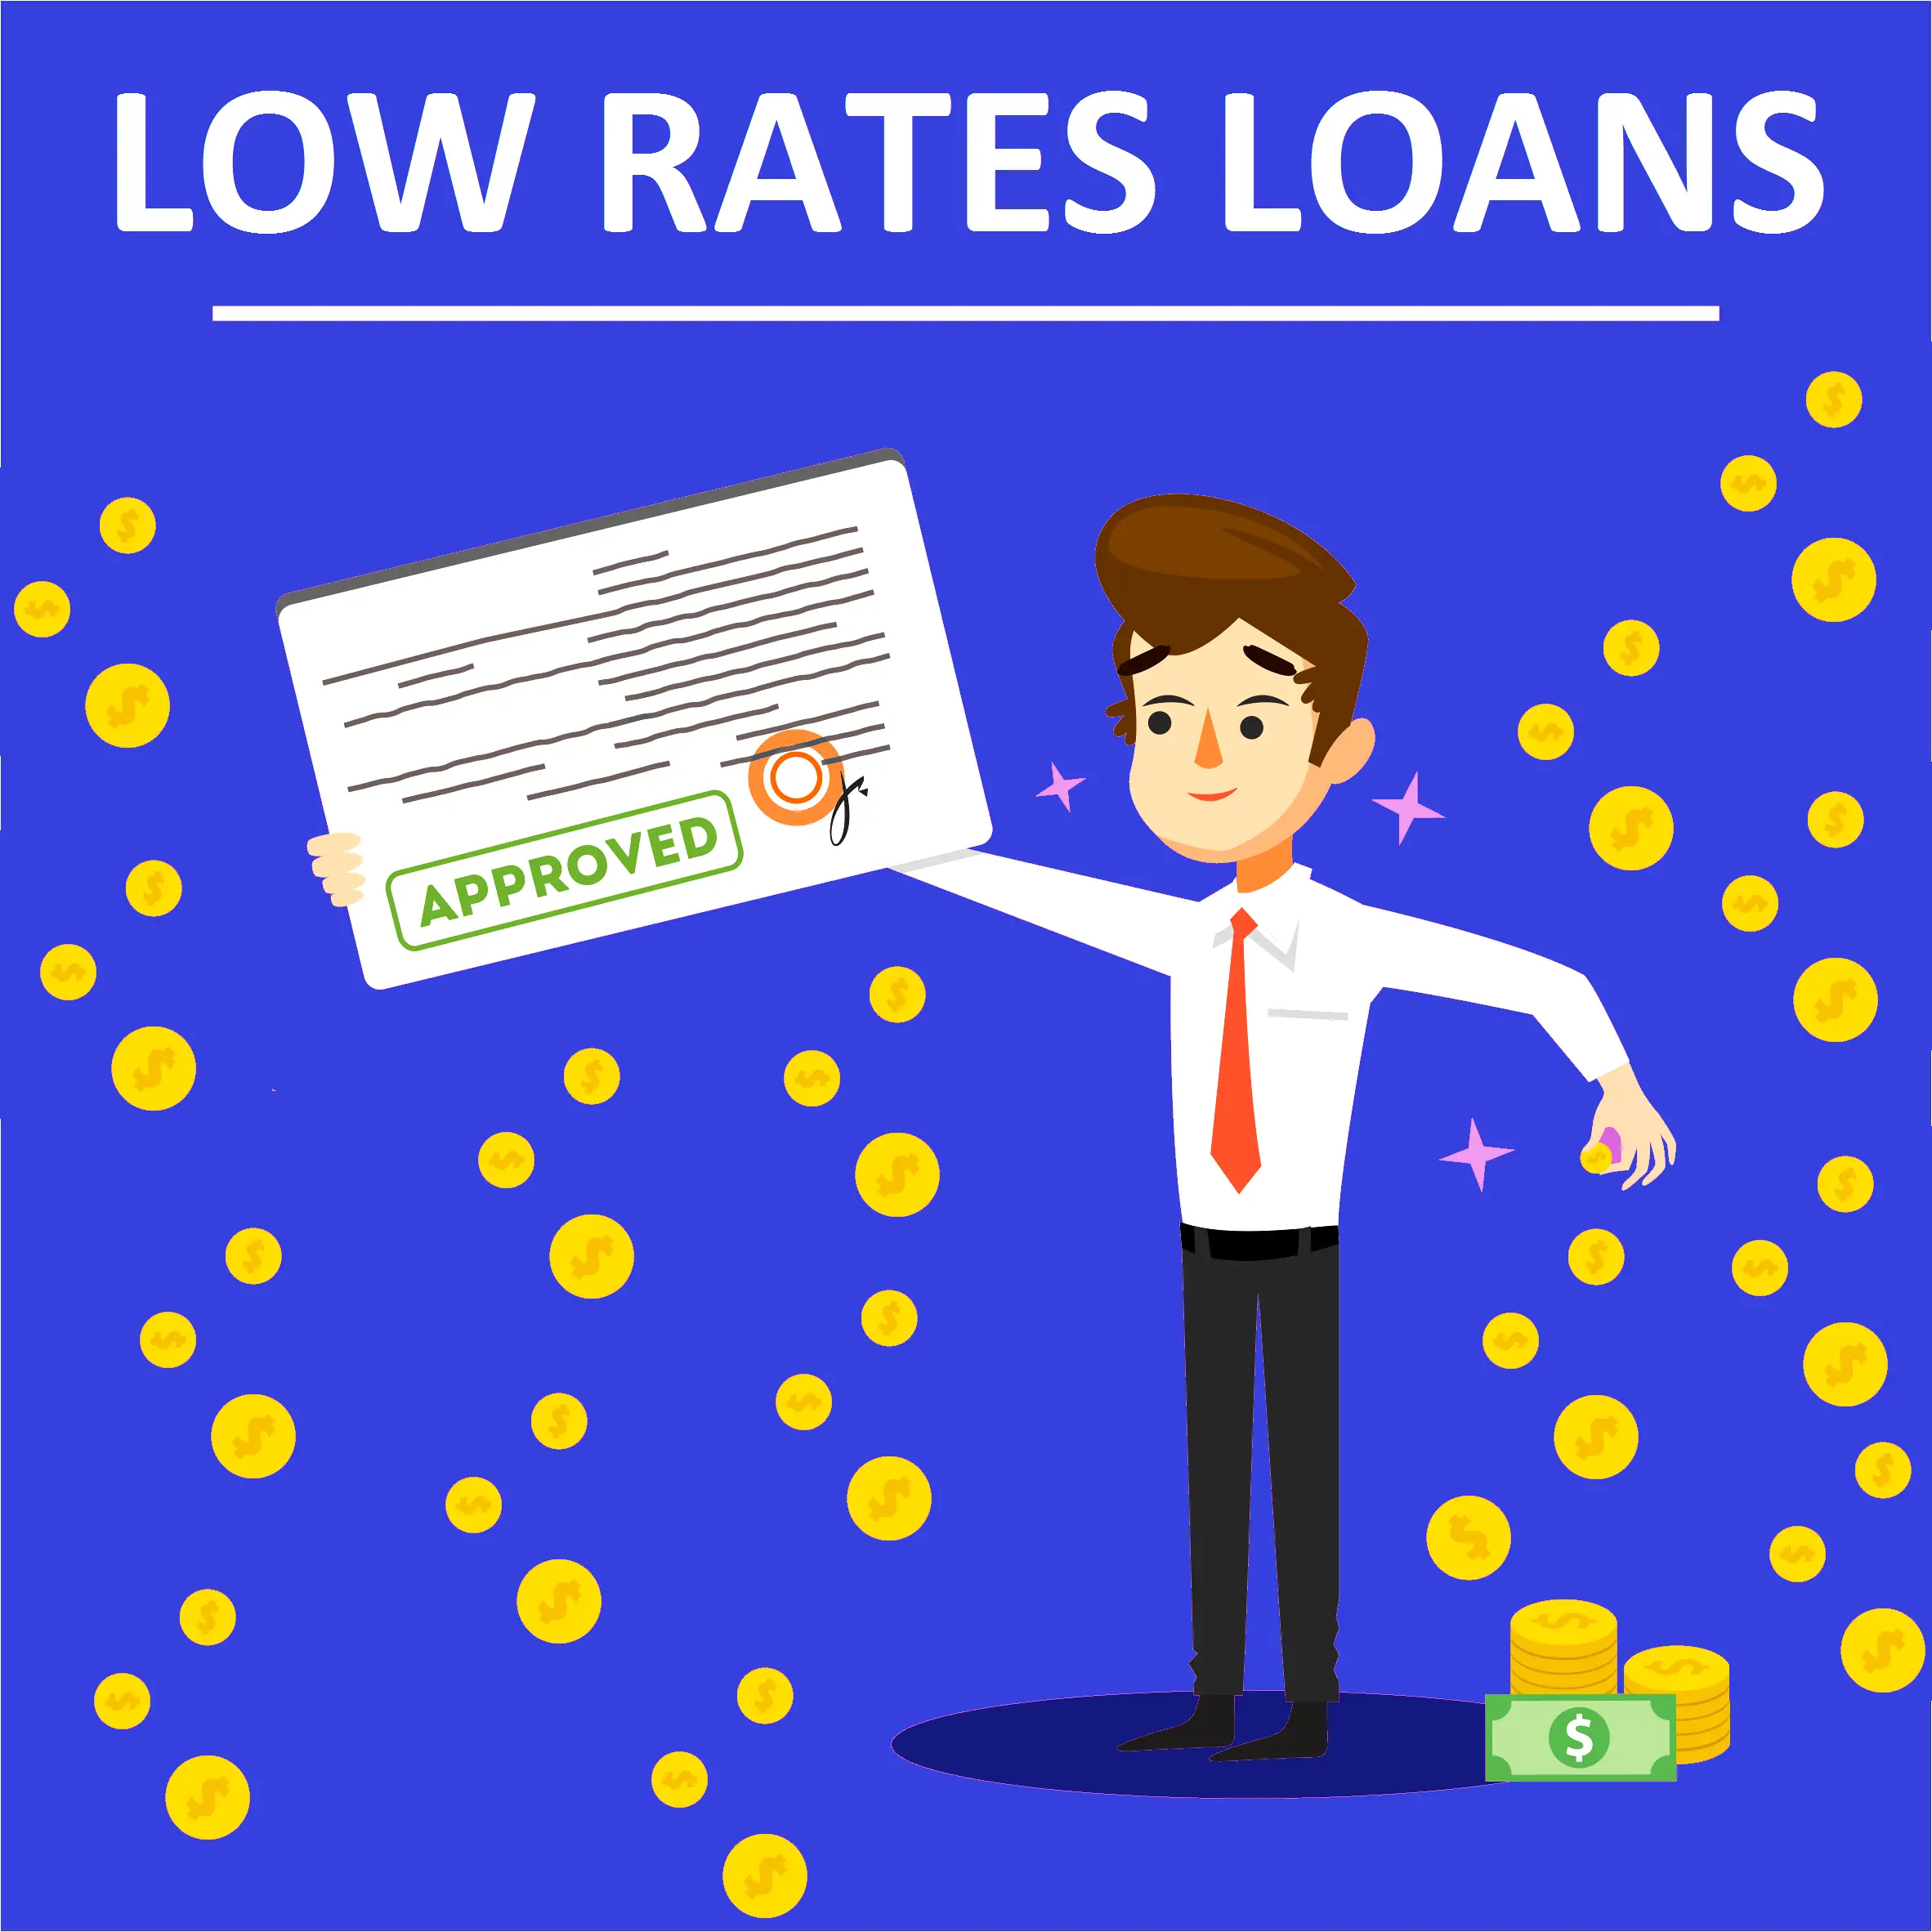 Low Rates Loans